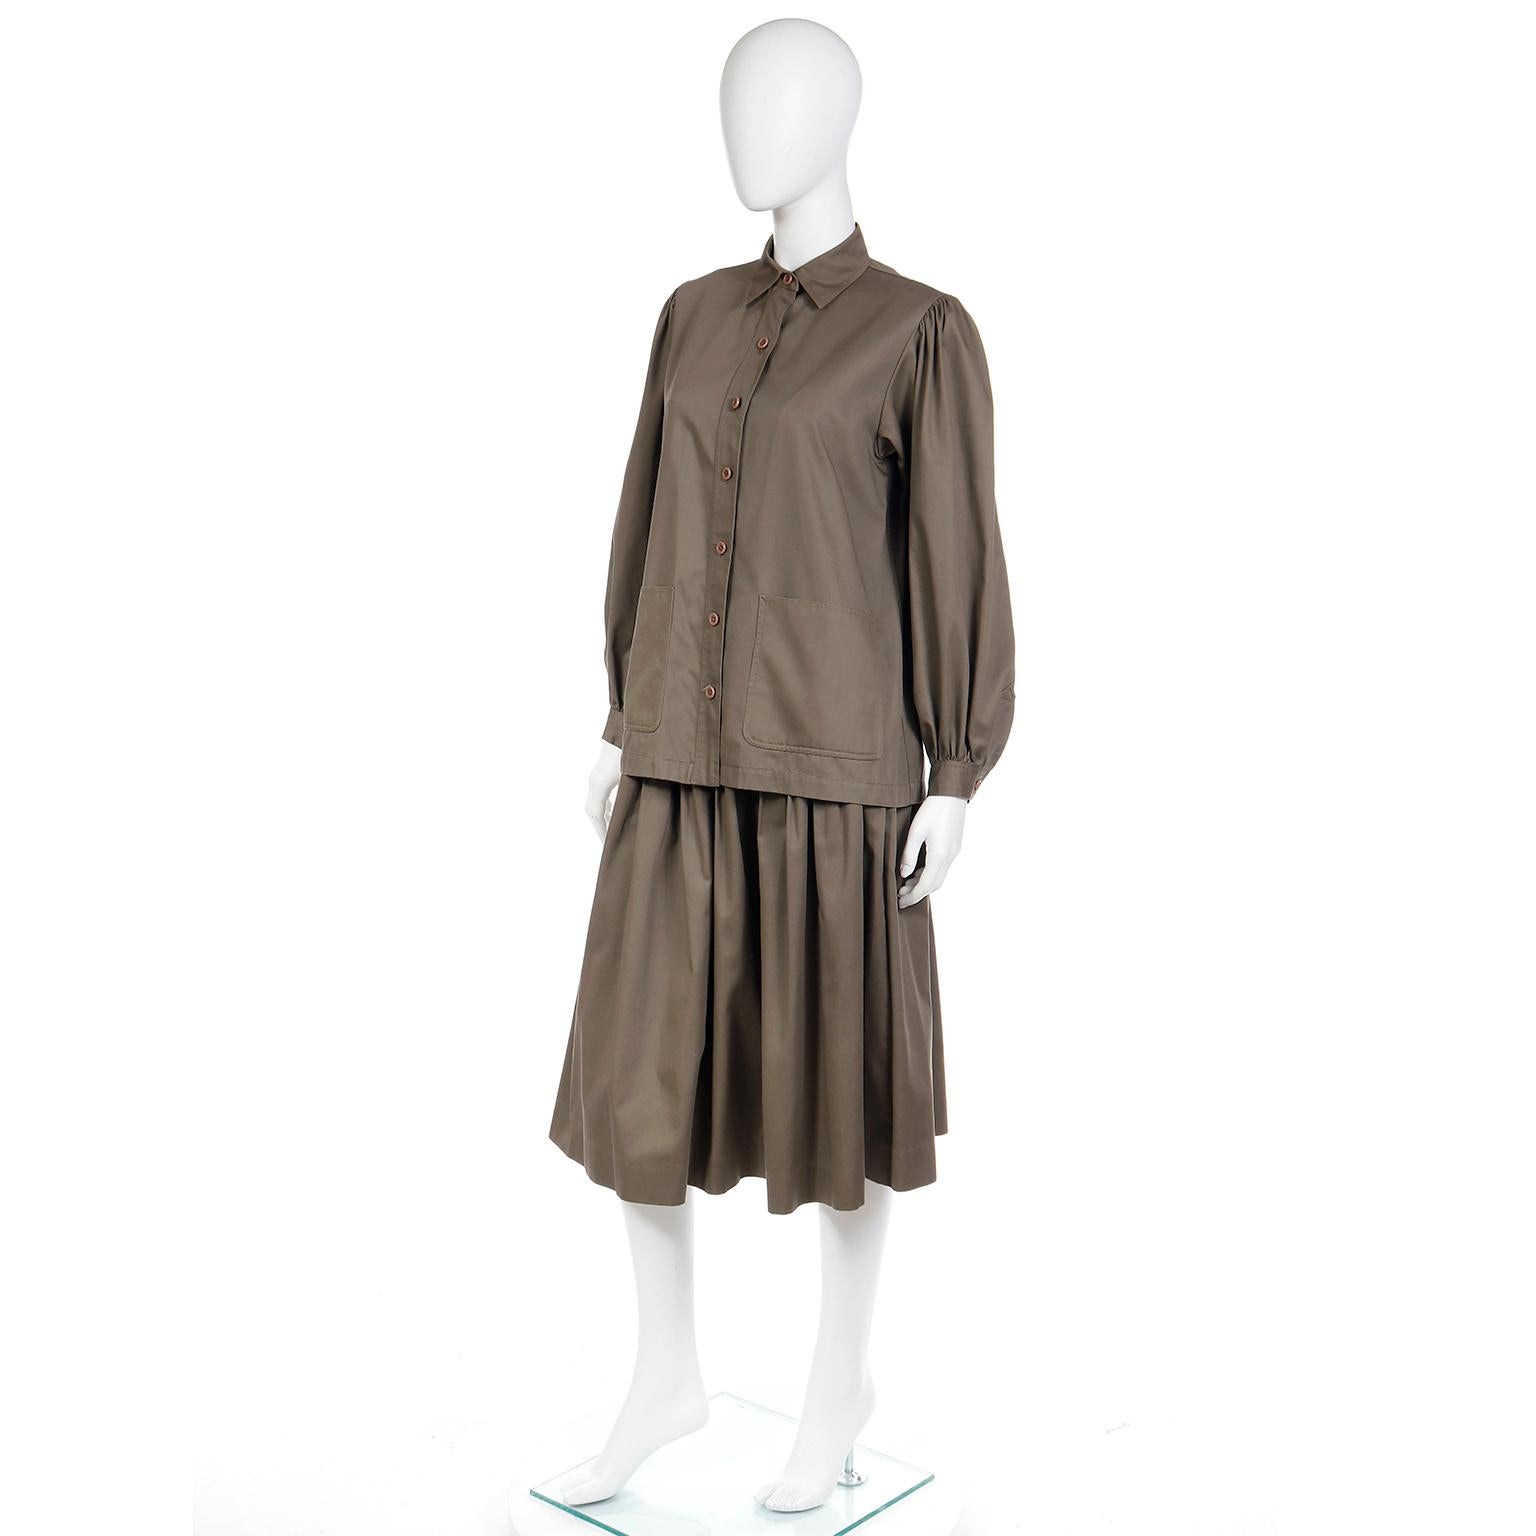 Yves Saint Laurent Green 2 Piece Jacket Style Oversized Blouse & Skirt Outfit 2